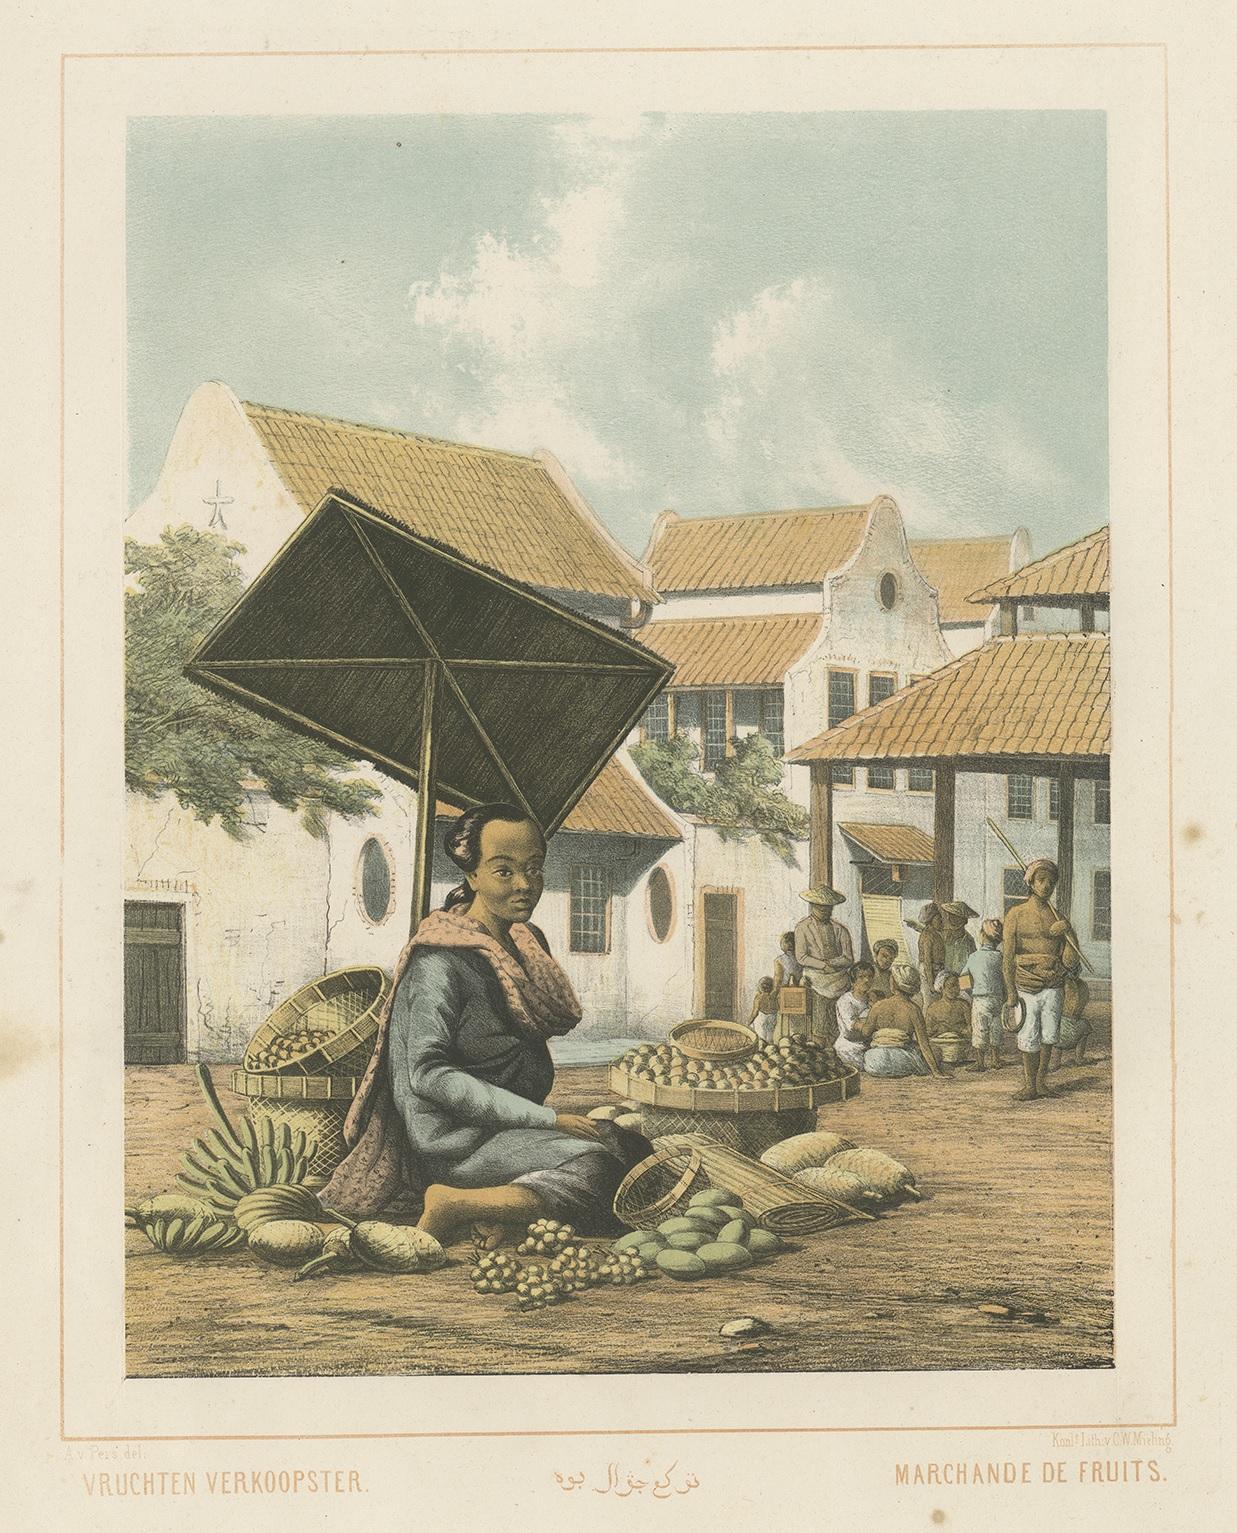 Antique print titled 'Vruchten Verkoopster - Marchande de Fruits'. Colored lithograph of a Javanese woman selling fruit. This print originates from 'Nederlandsch Oost-Indische typen' after work by Auguste van Pers (1815-1871) a Dutch artist who